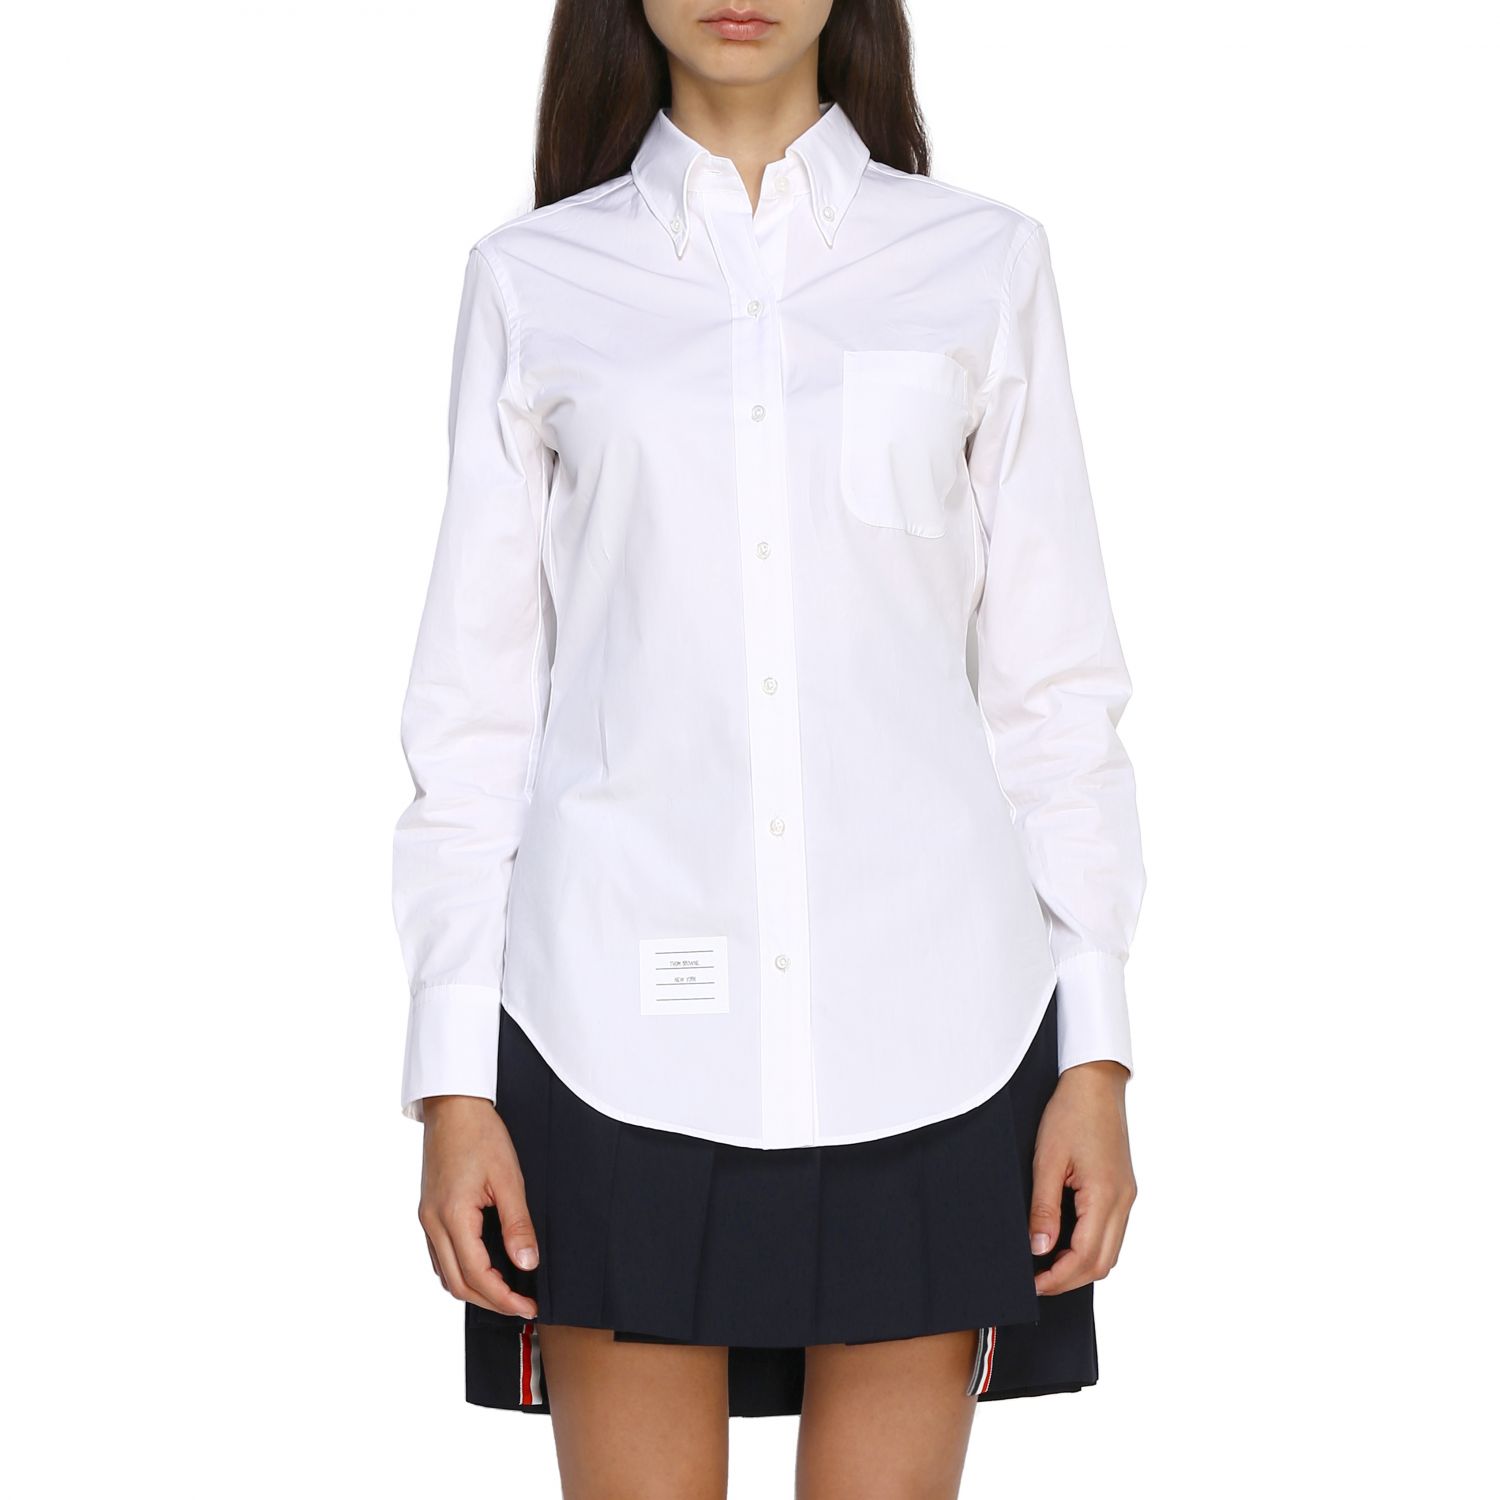 Thom Browne Outlet: shirt for woman - White | Thom Browne shirt FLL005G ...